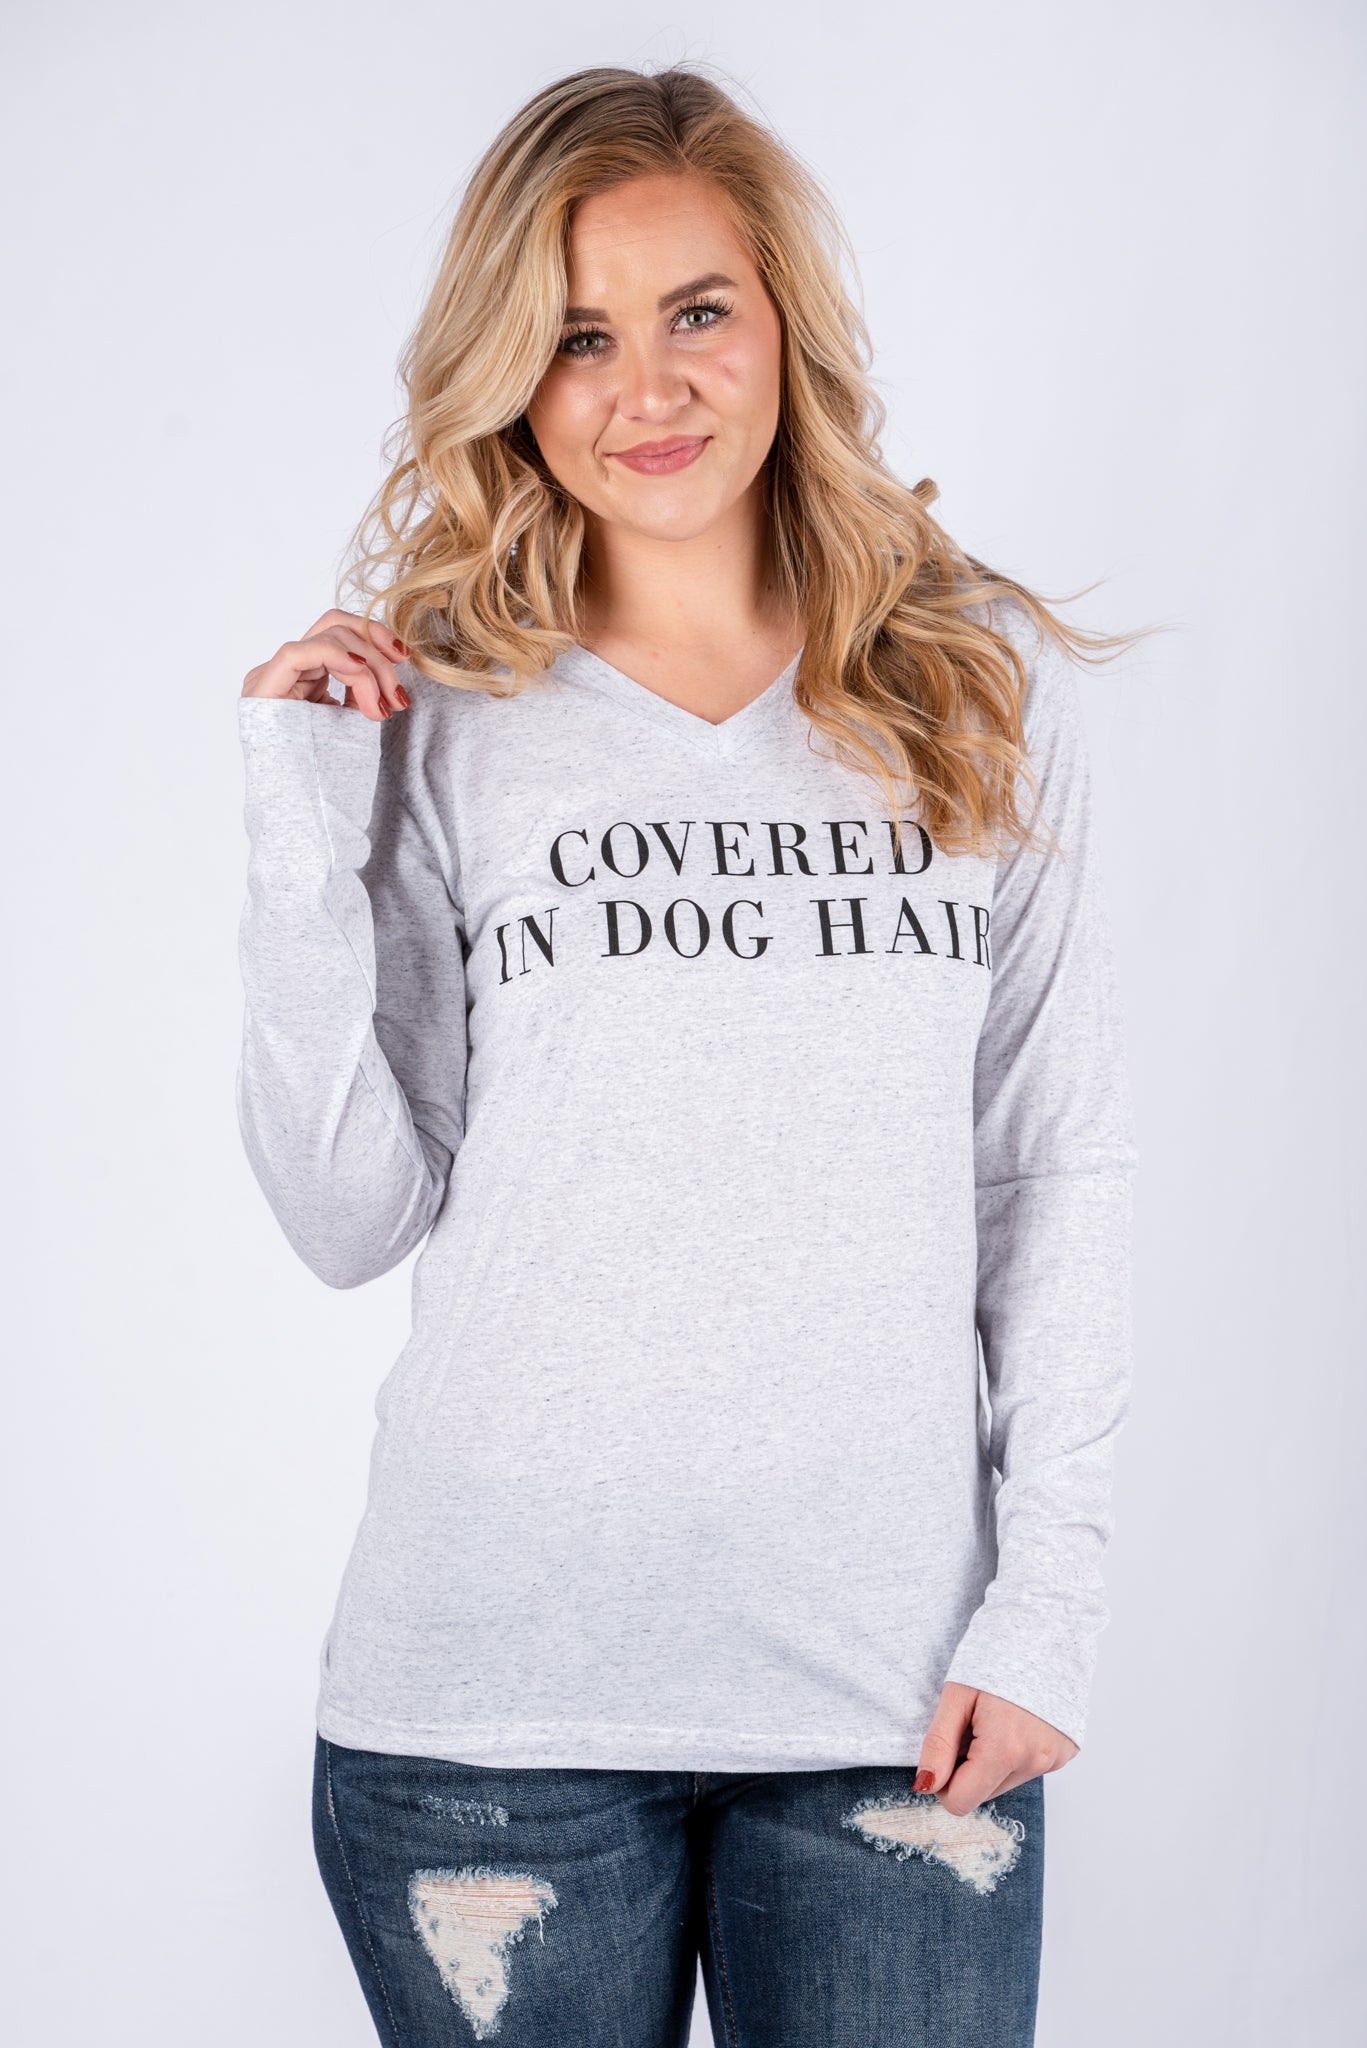 Covered in dog hair unisex long sleeve t-shirt white fleck - Stylish T-shirts - Trendy Graphic T-Shirts and Tank Tops at Lush Fashion Lounge Boutique in Oklahoma City